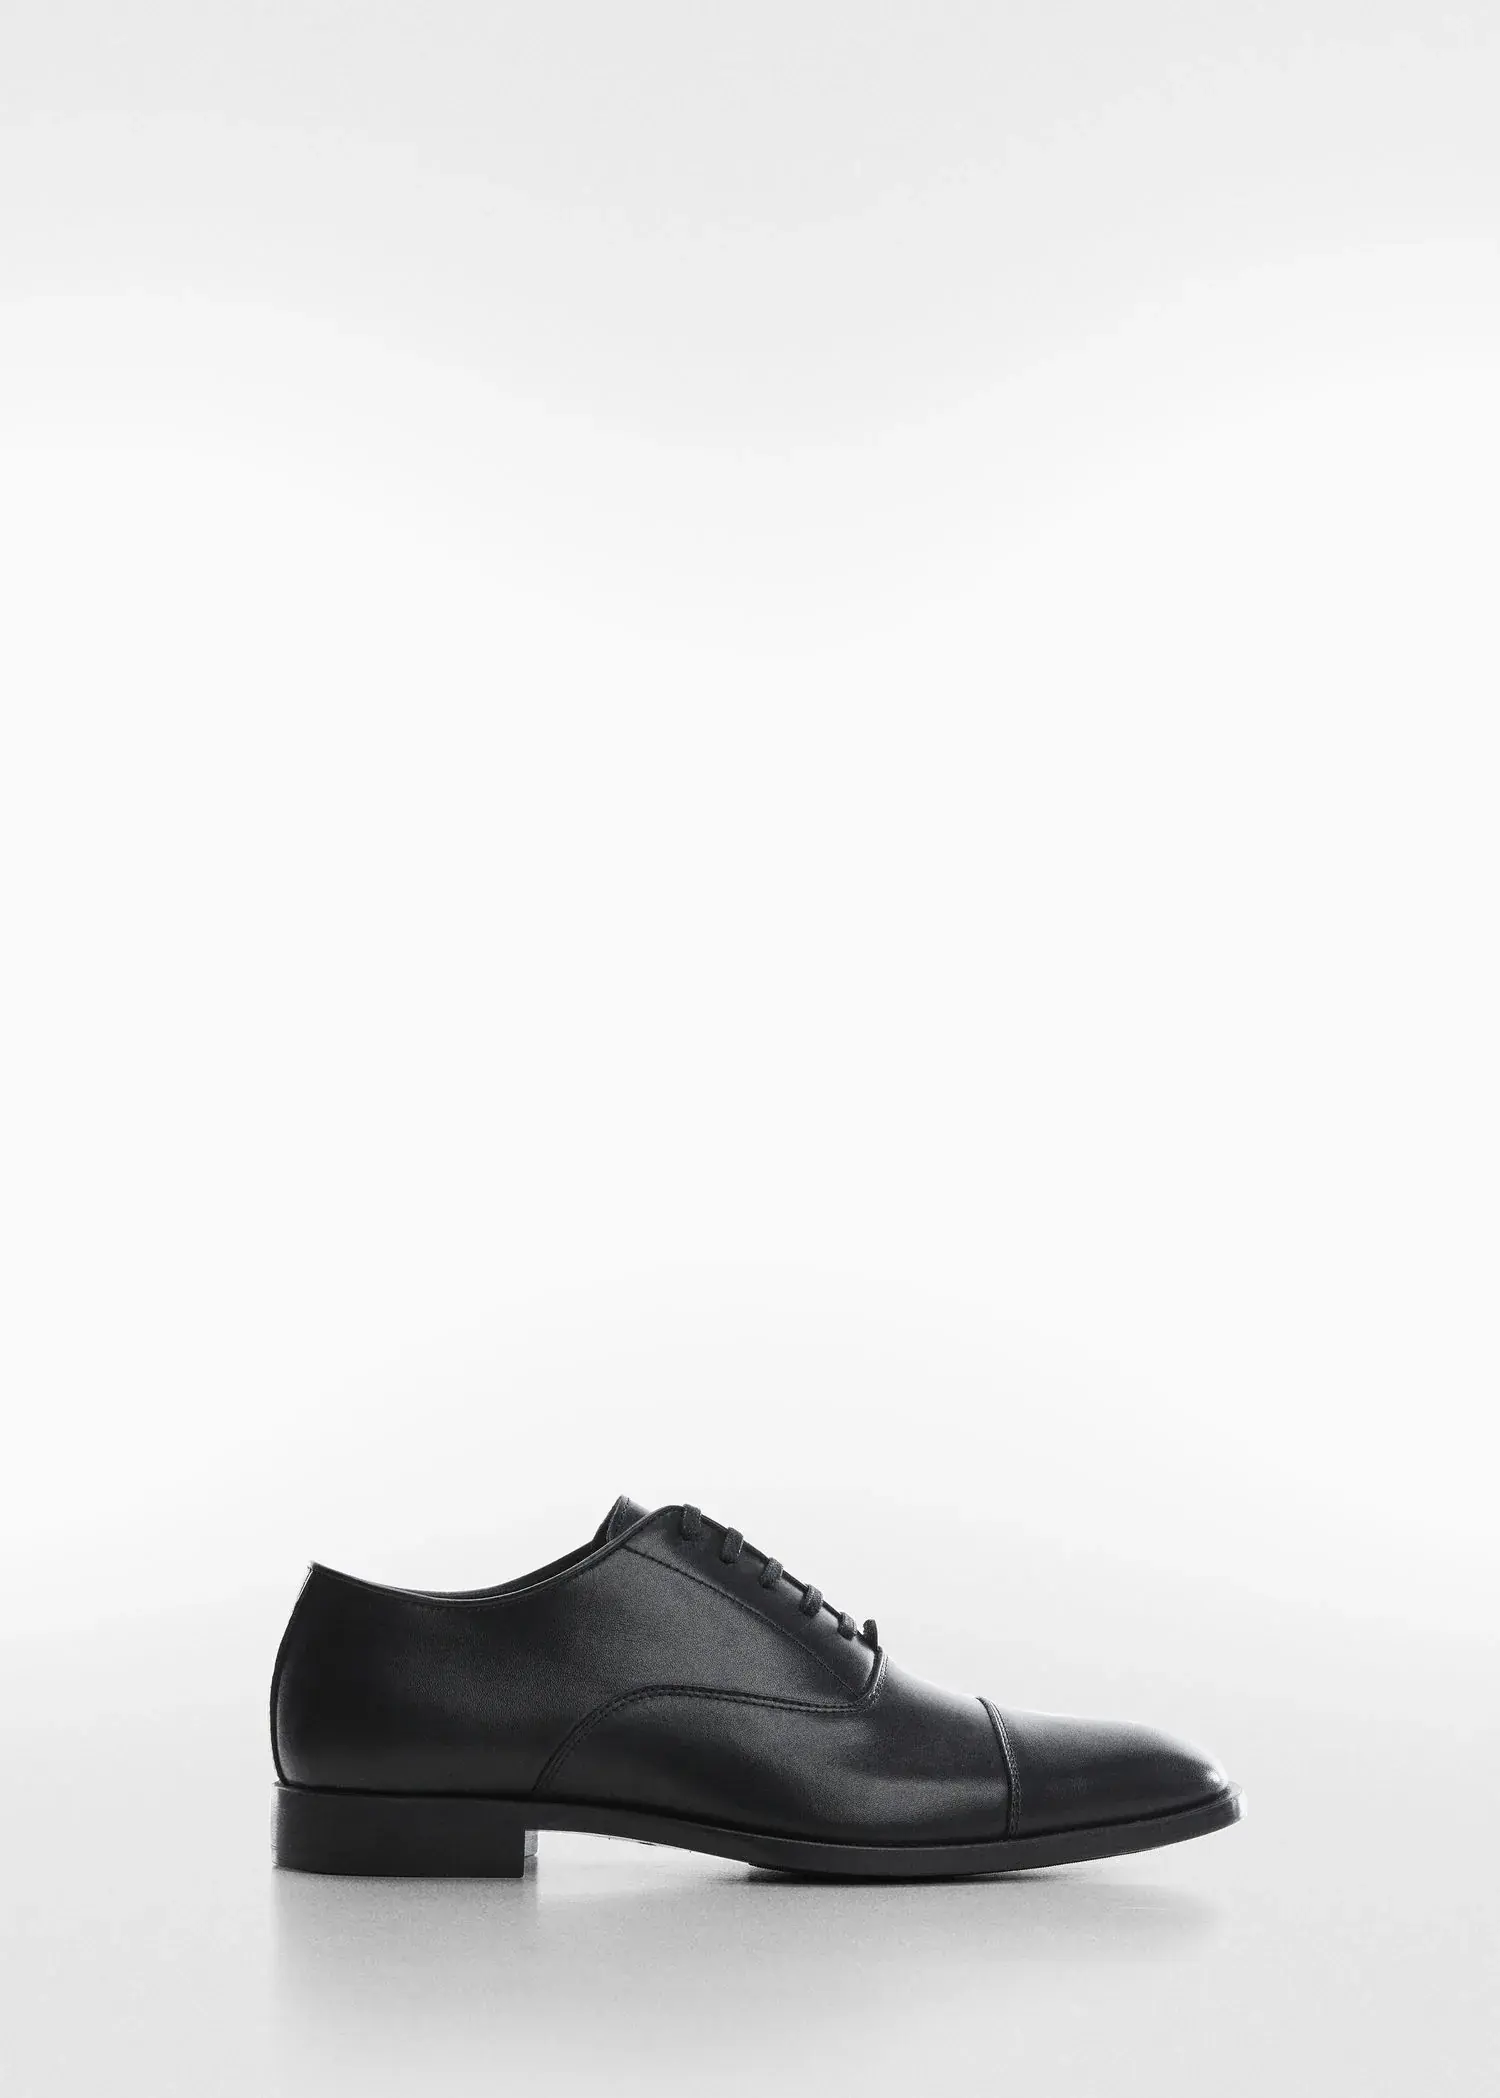 Mango Elongated leather suit shoes. a pair of black shoes on a white background. 